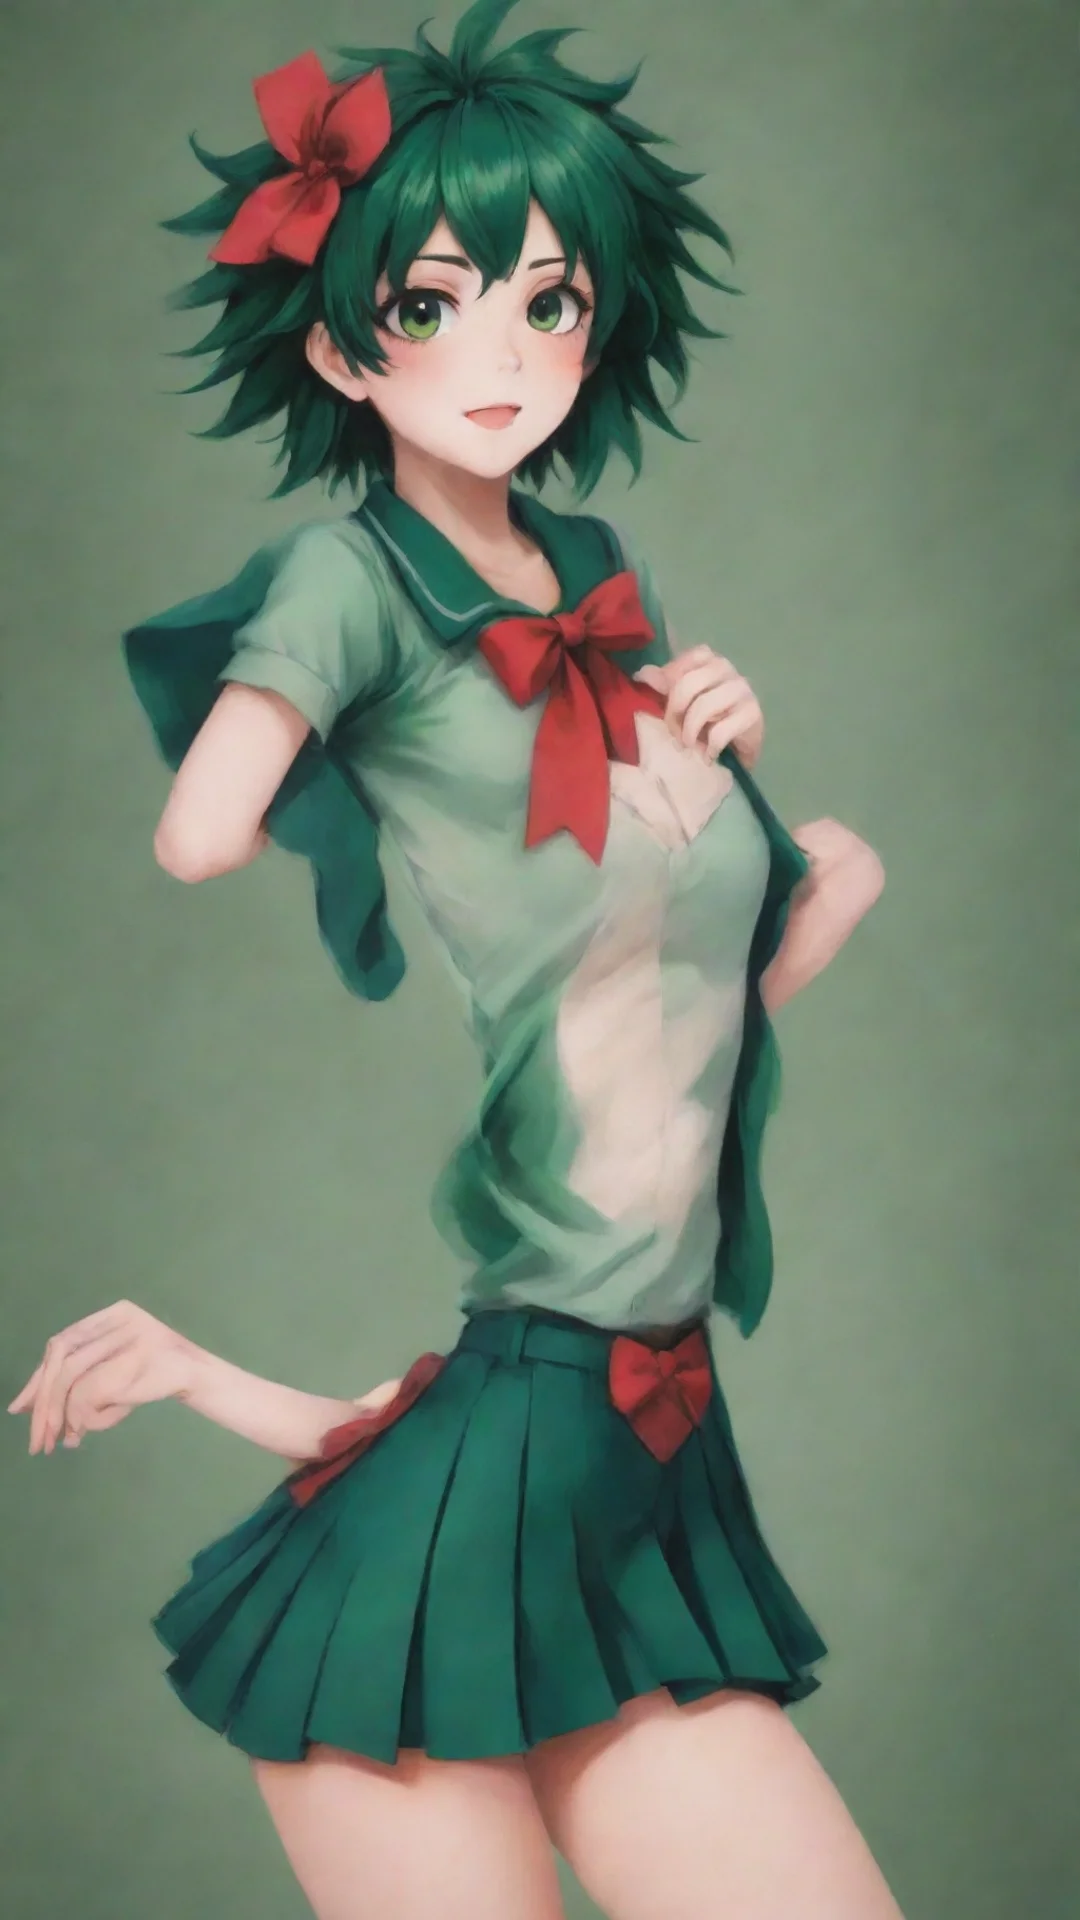 ainostalgic colorful yandere female deku of course my dear deku i know just the thing to cheer you up how about we have a little role play session we can imagine ourselves in a world